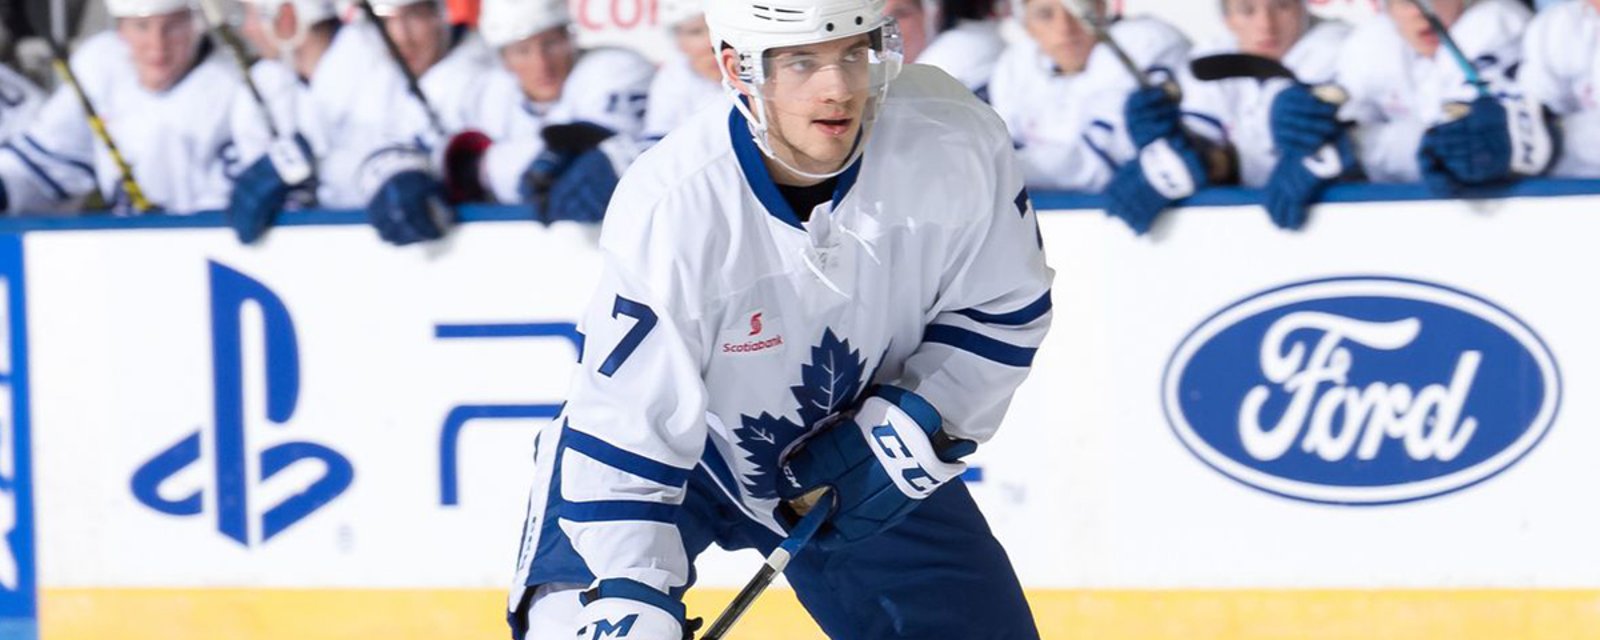 Breaking: Bad news for Leafs and Liljegren